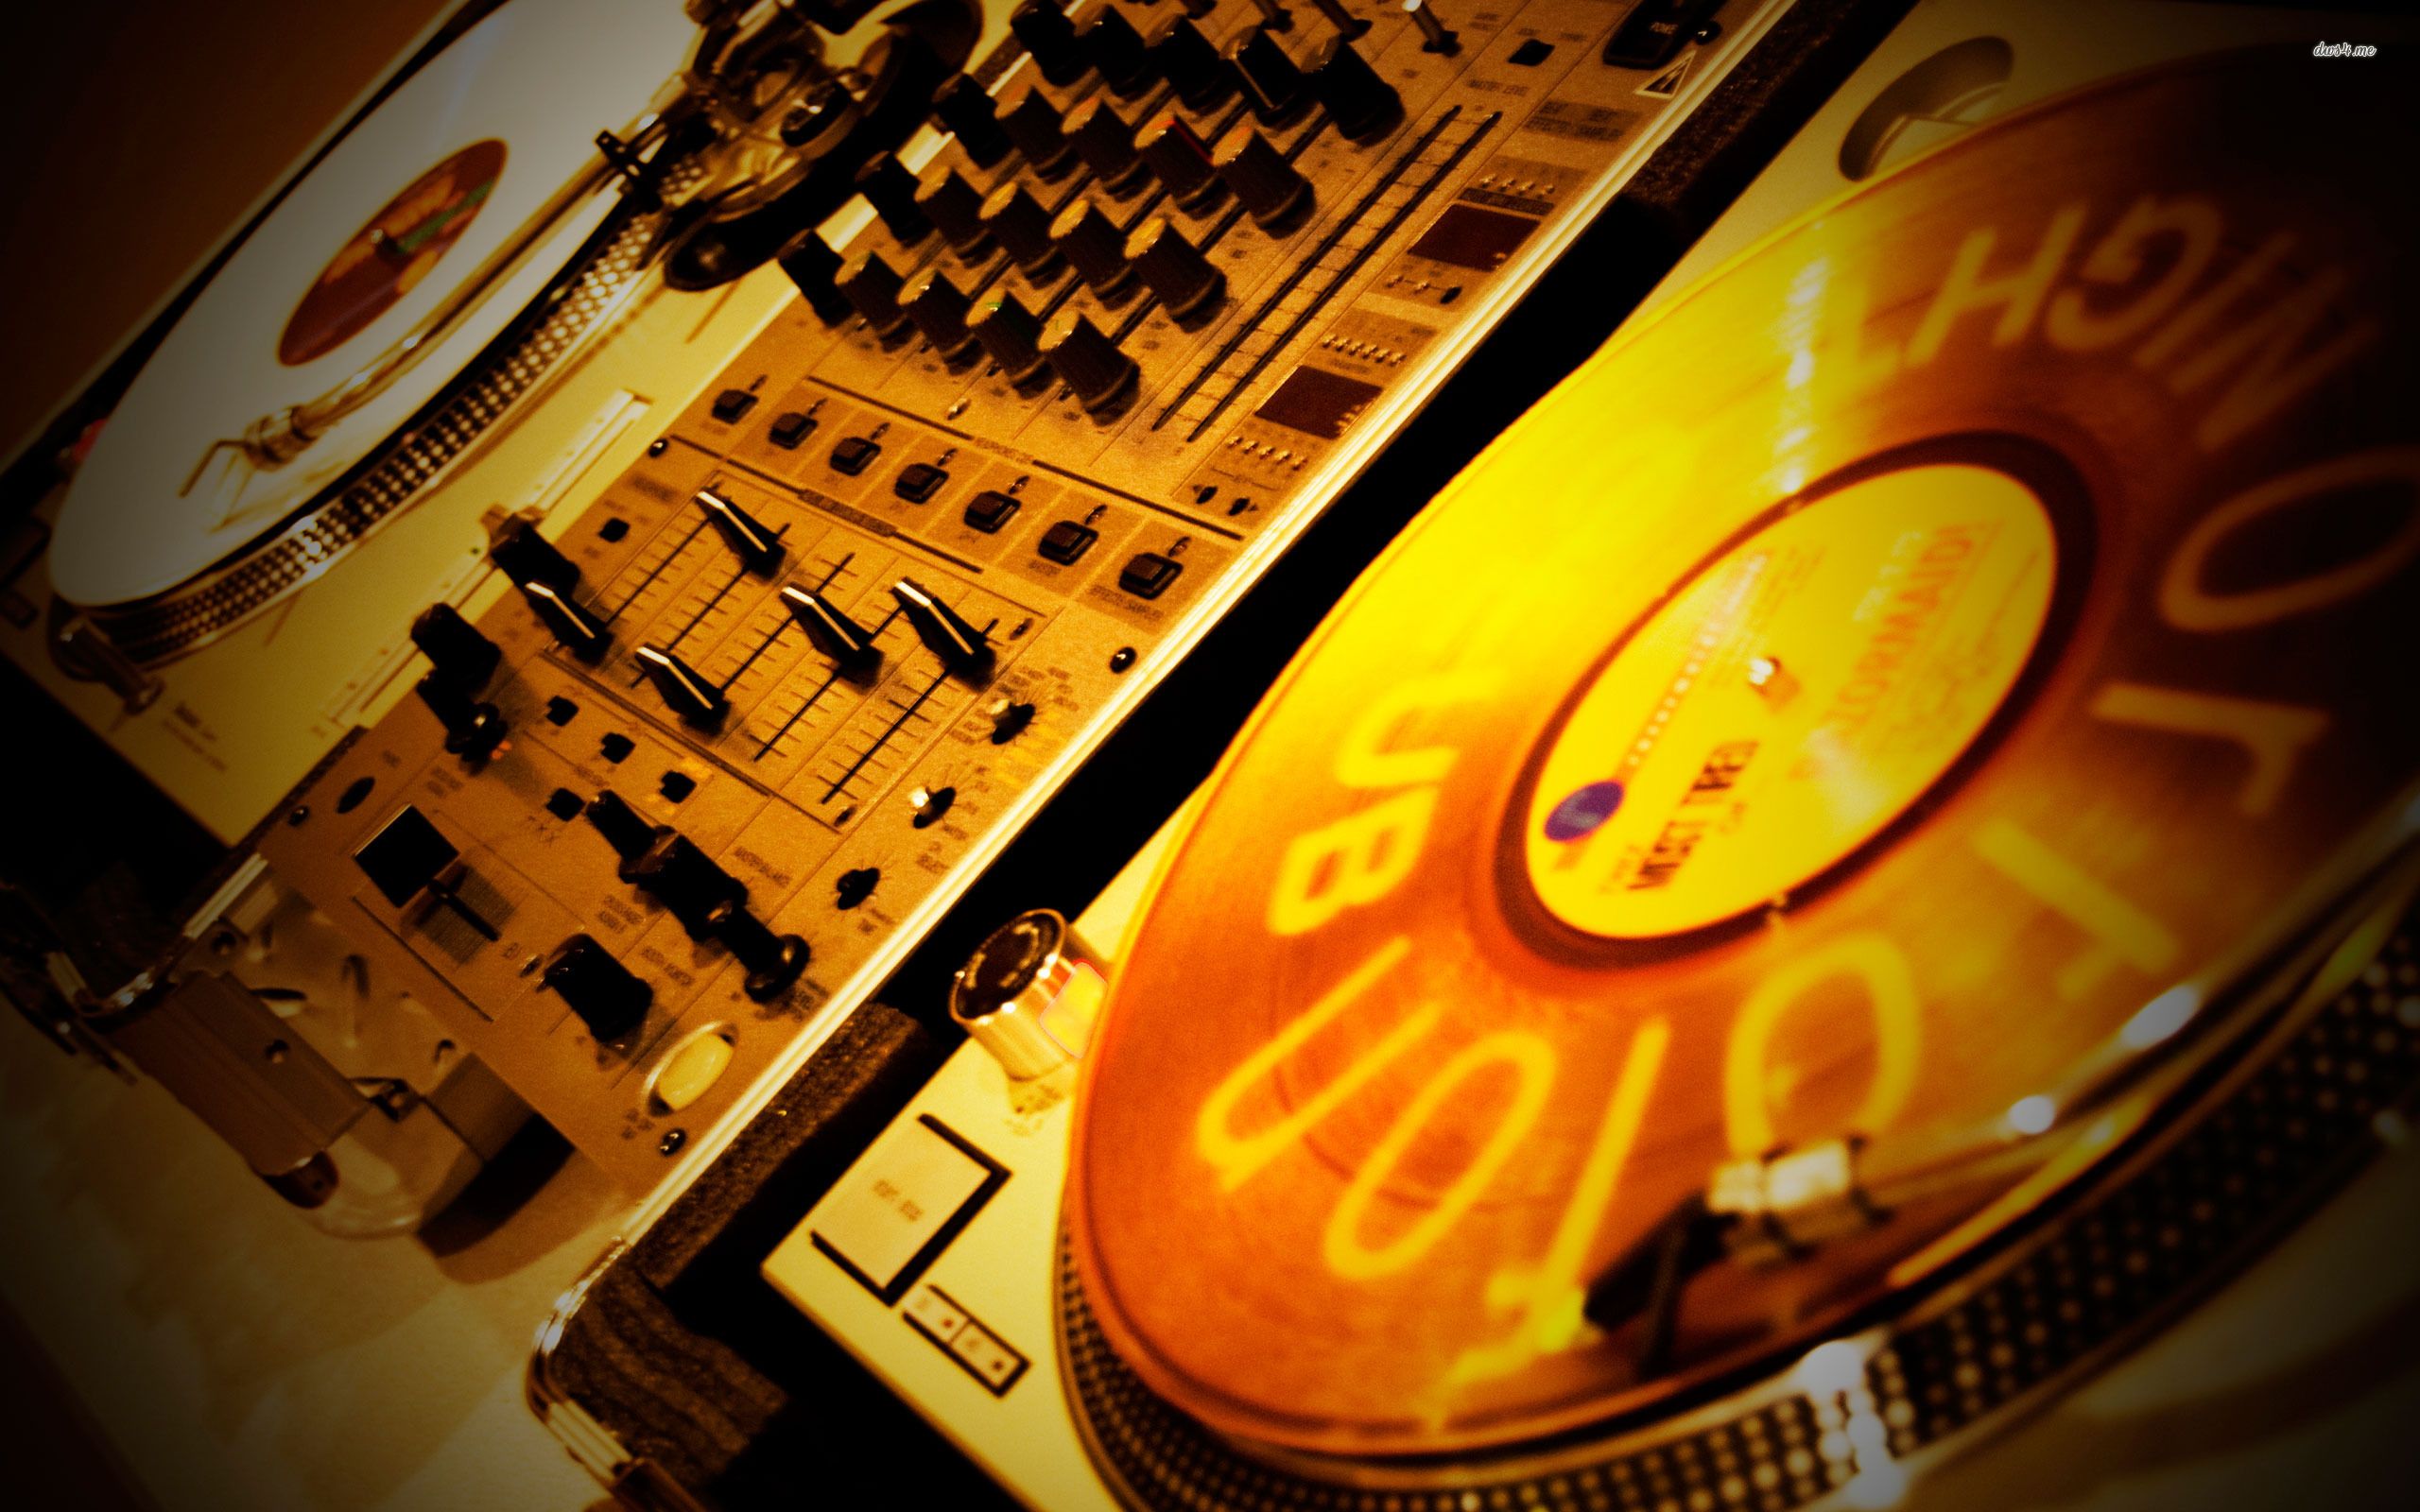 Turntable wallpaper - Music wallpapers - #9330